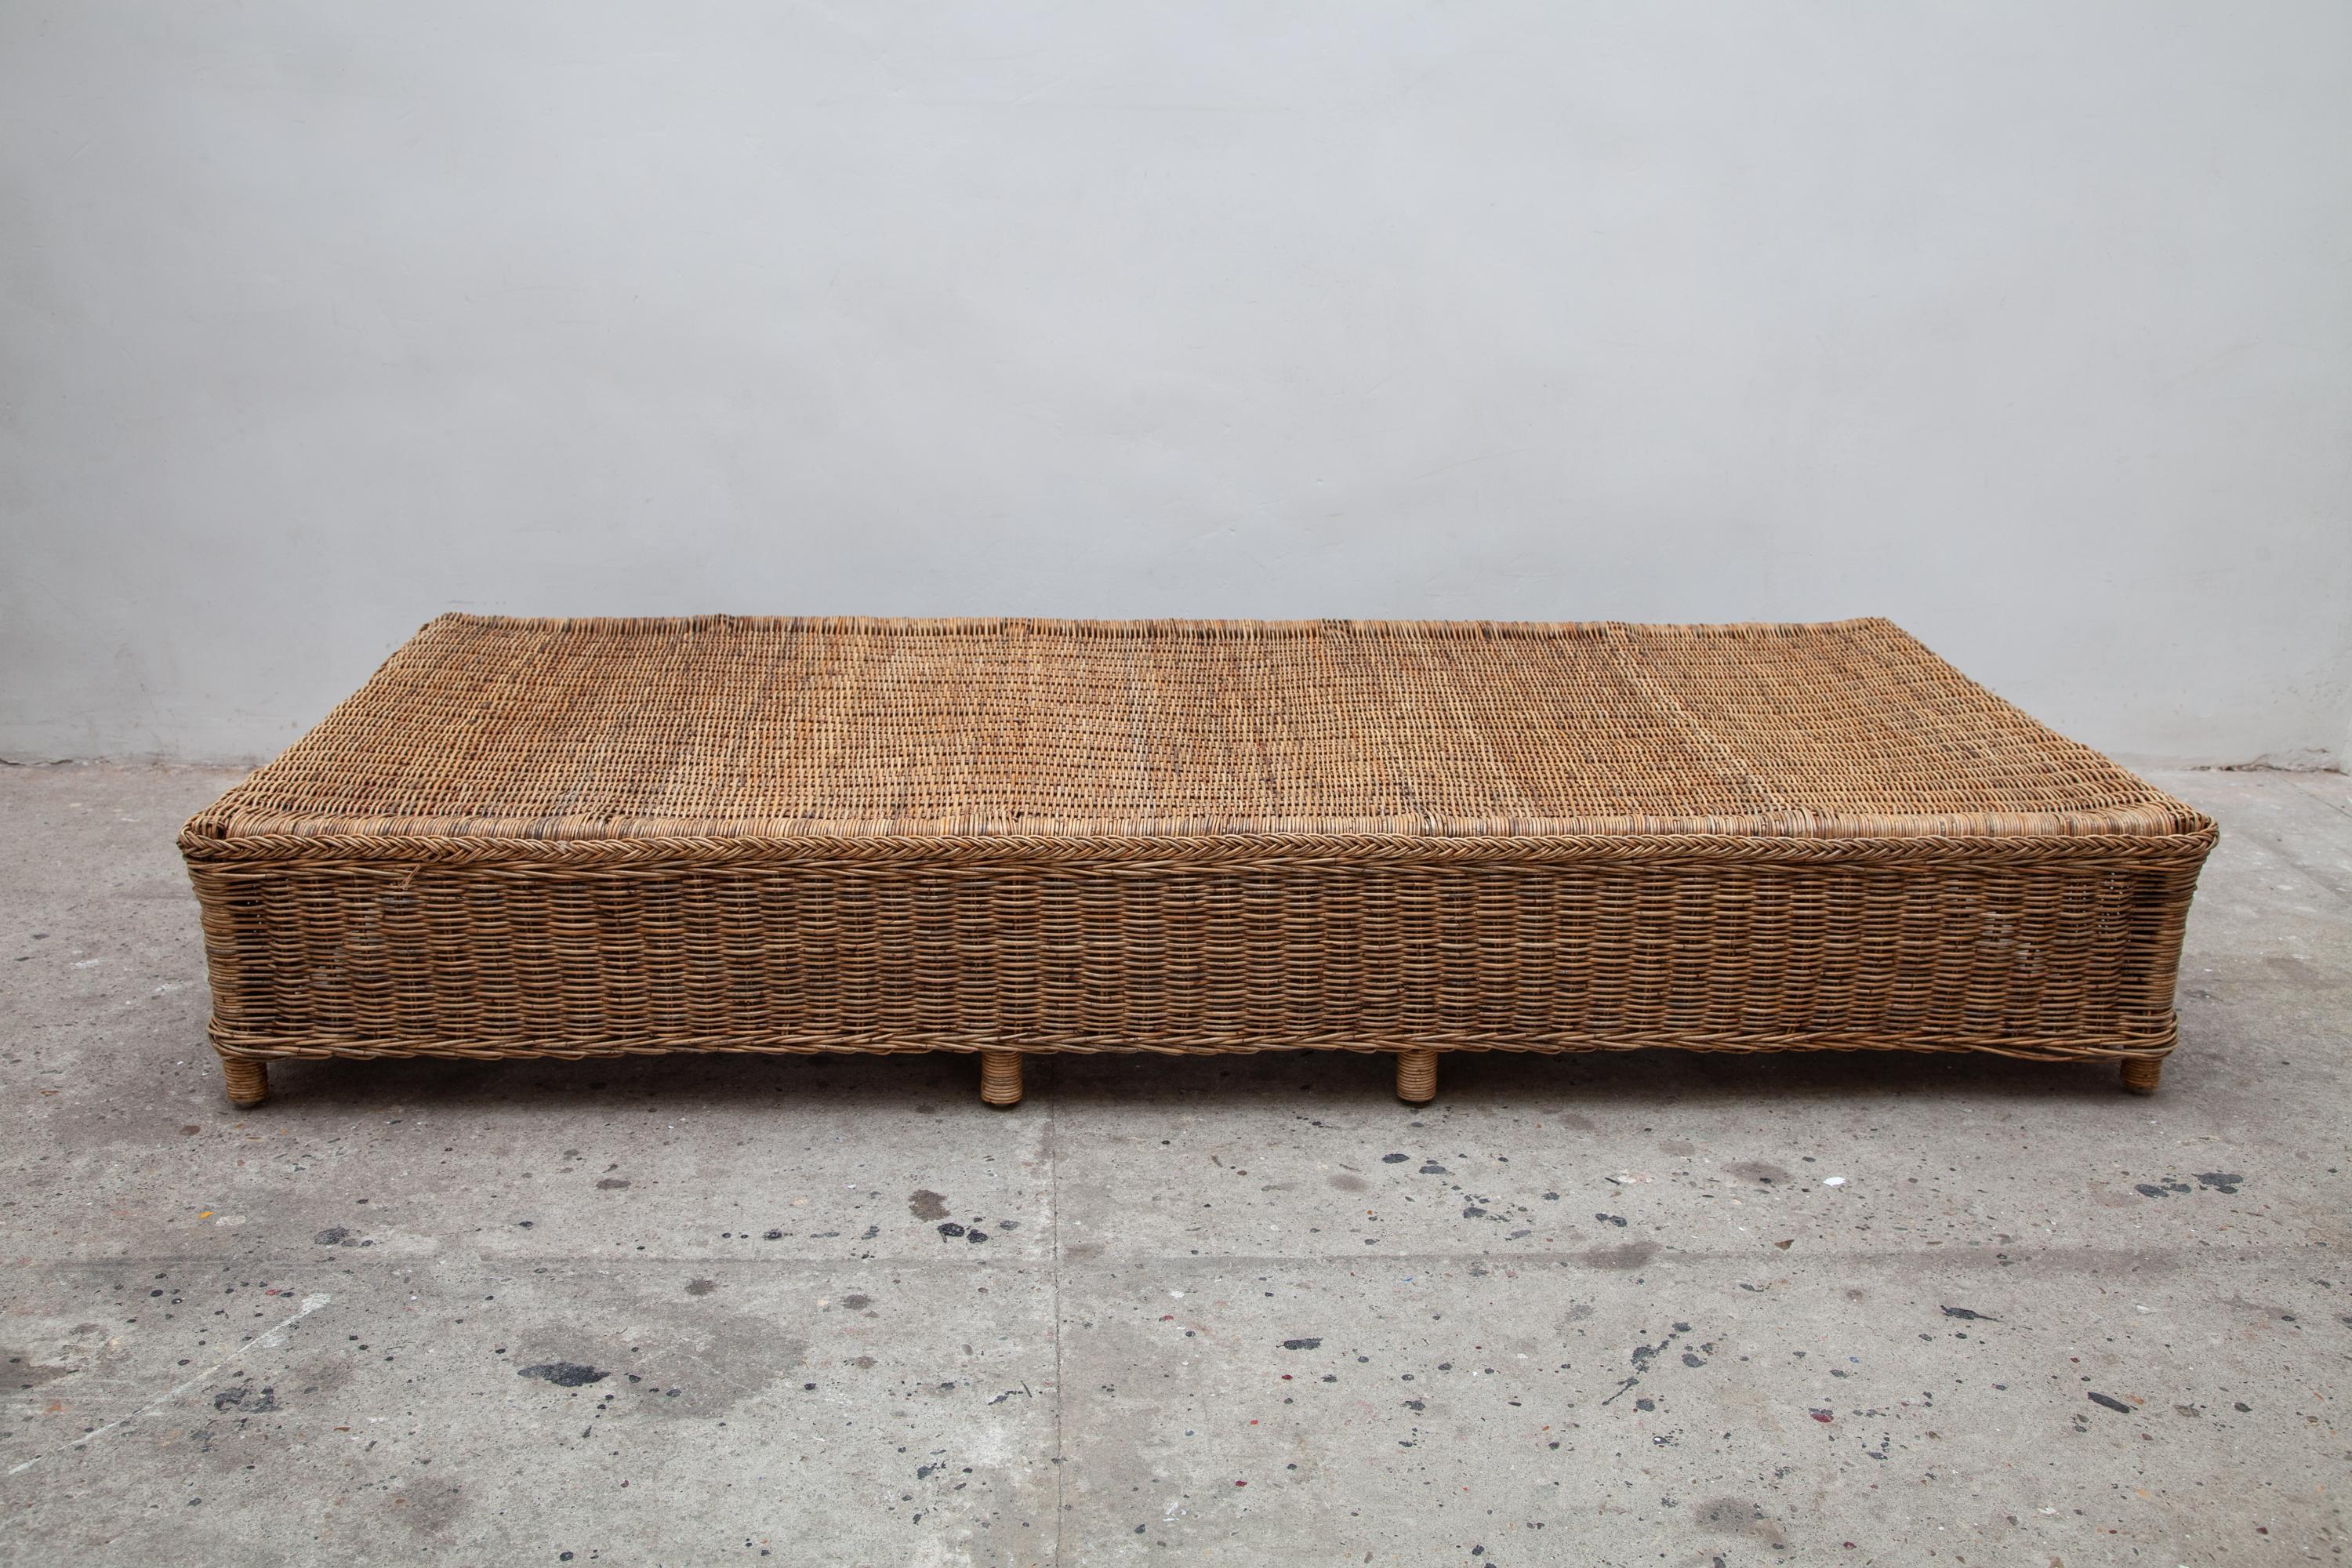 Vintage rattan daybed. Sturdy frame with a beautiful braided edge. Can be styled with any pillows or cushions.
Measures: 192 W x 87 D x 30 H cm.